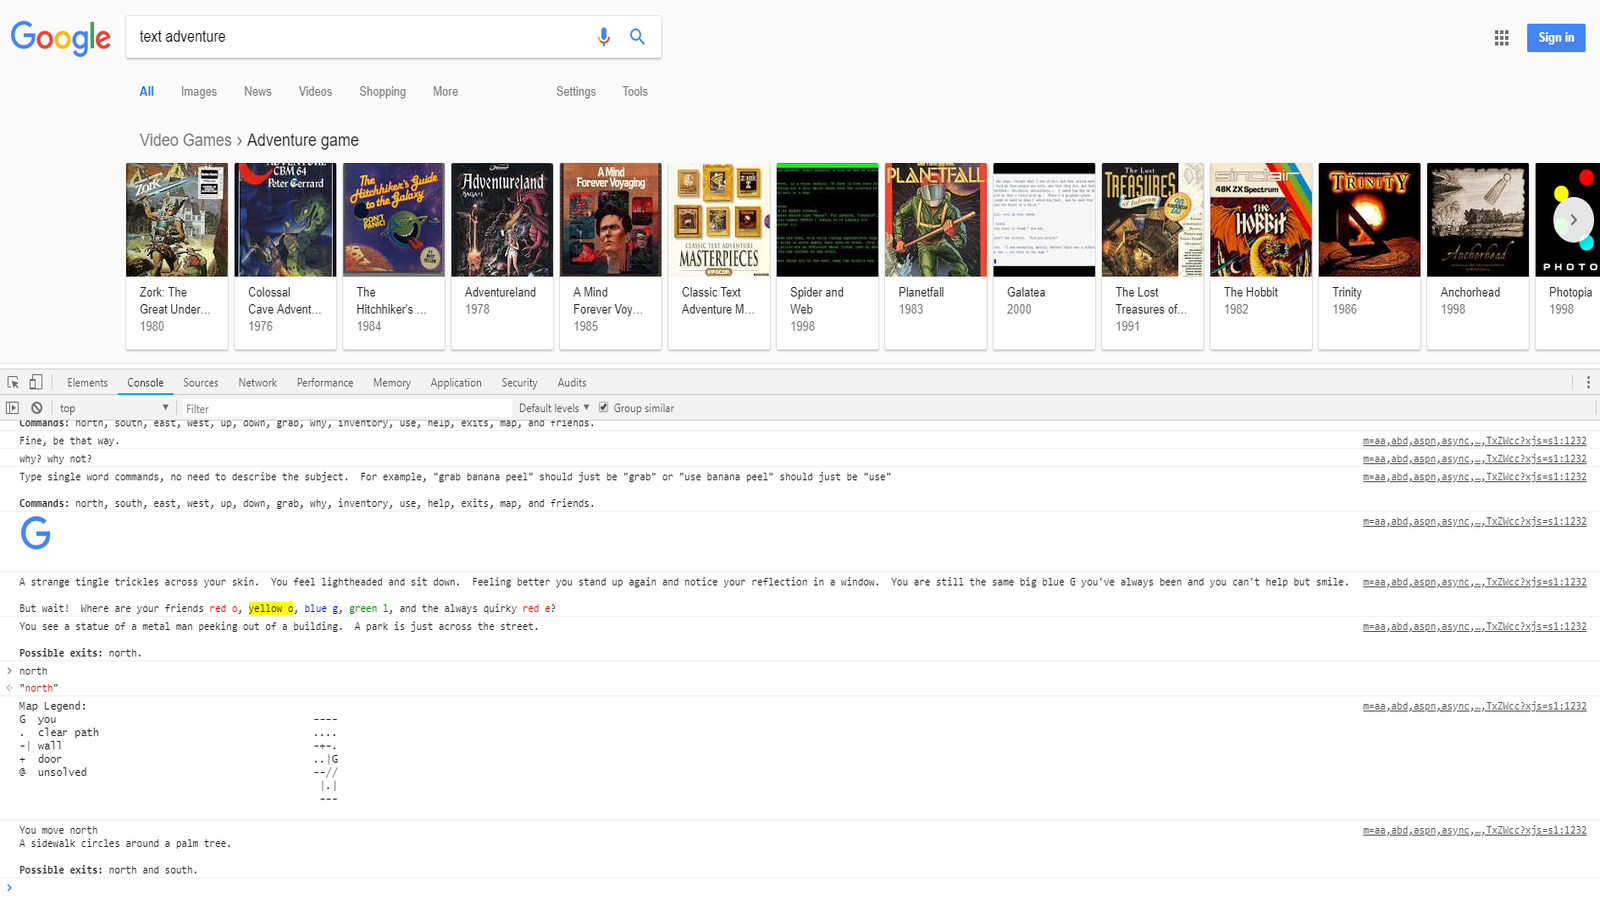 Google's text adventure game discovered